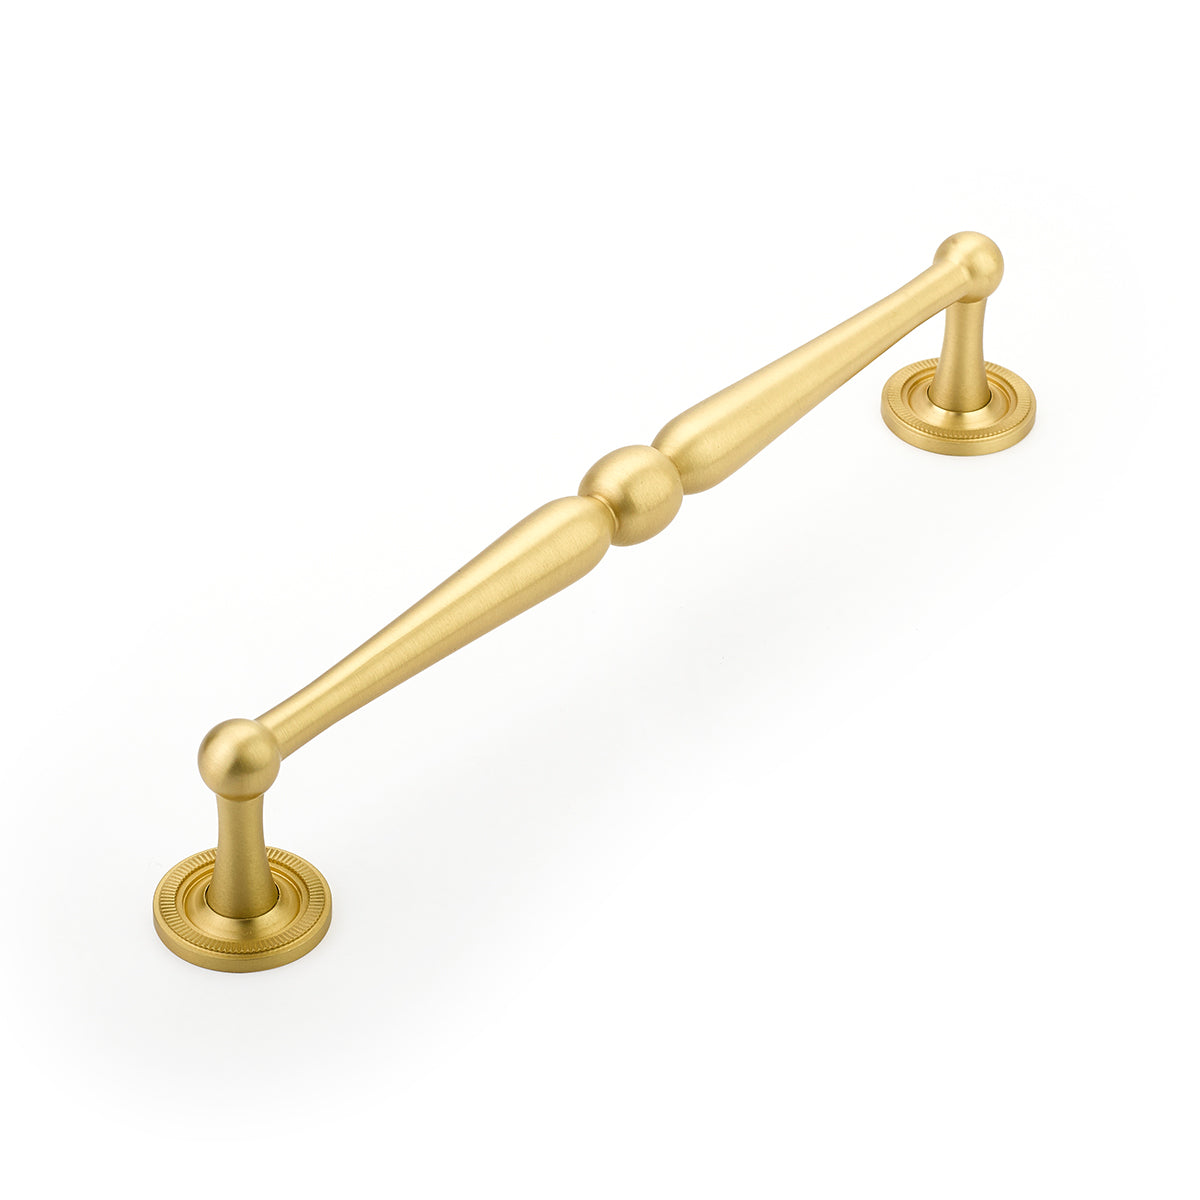 8 1/2 Inch (8 Inch c-c) Atherton Pull with Knurled Footplates (Satin Brass Finish)